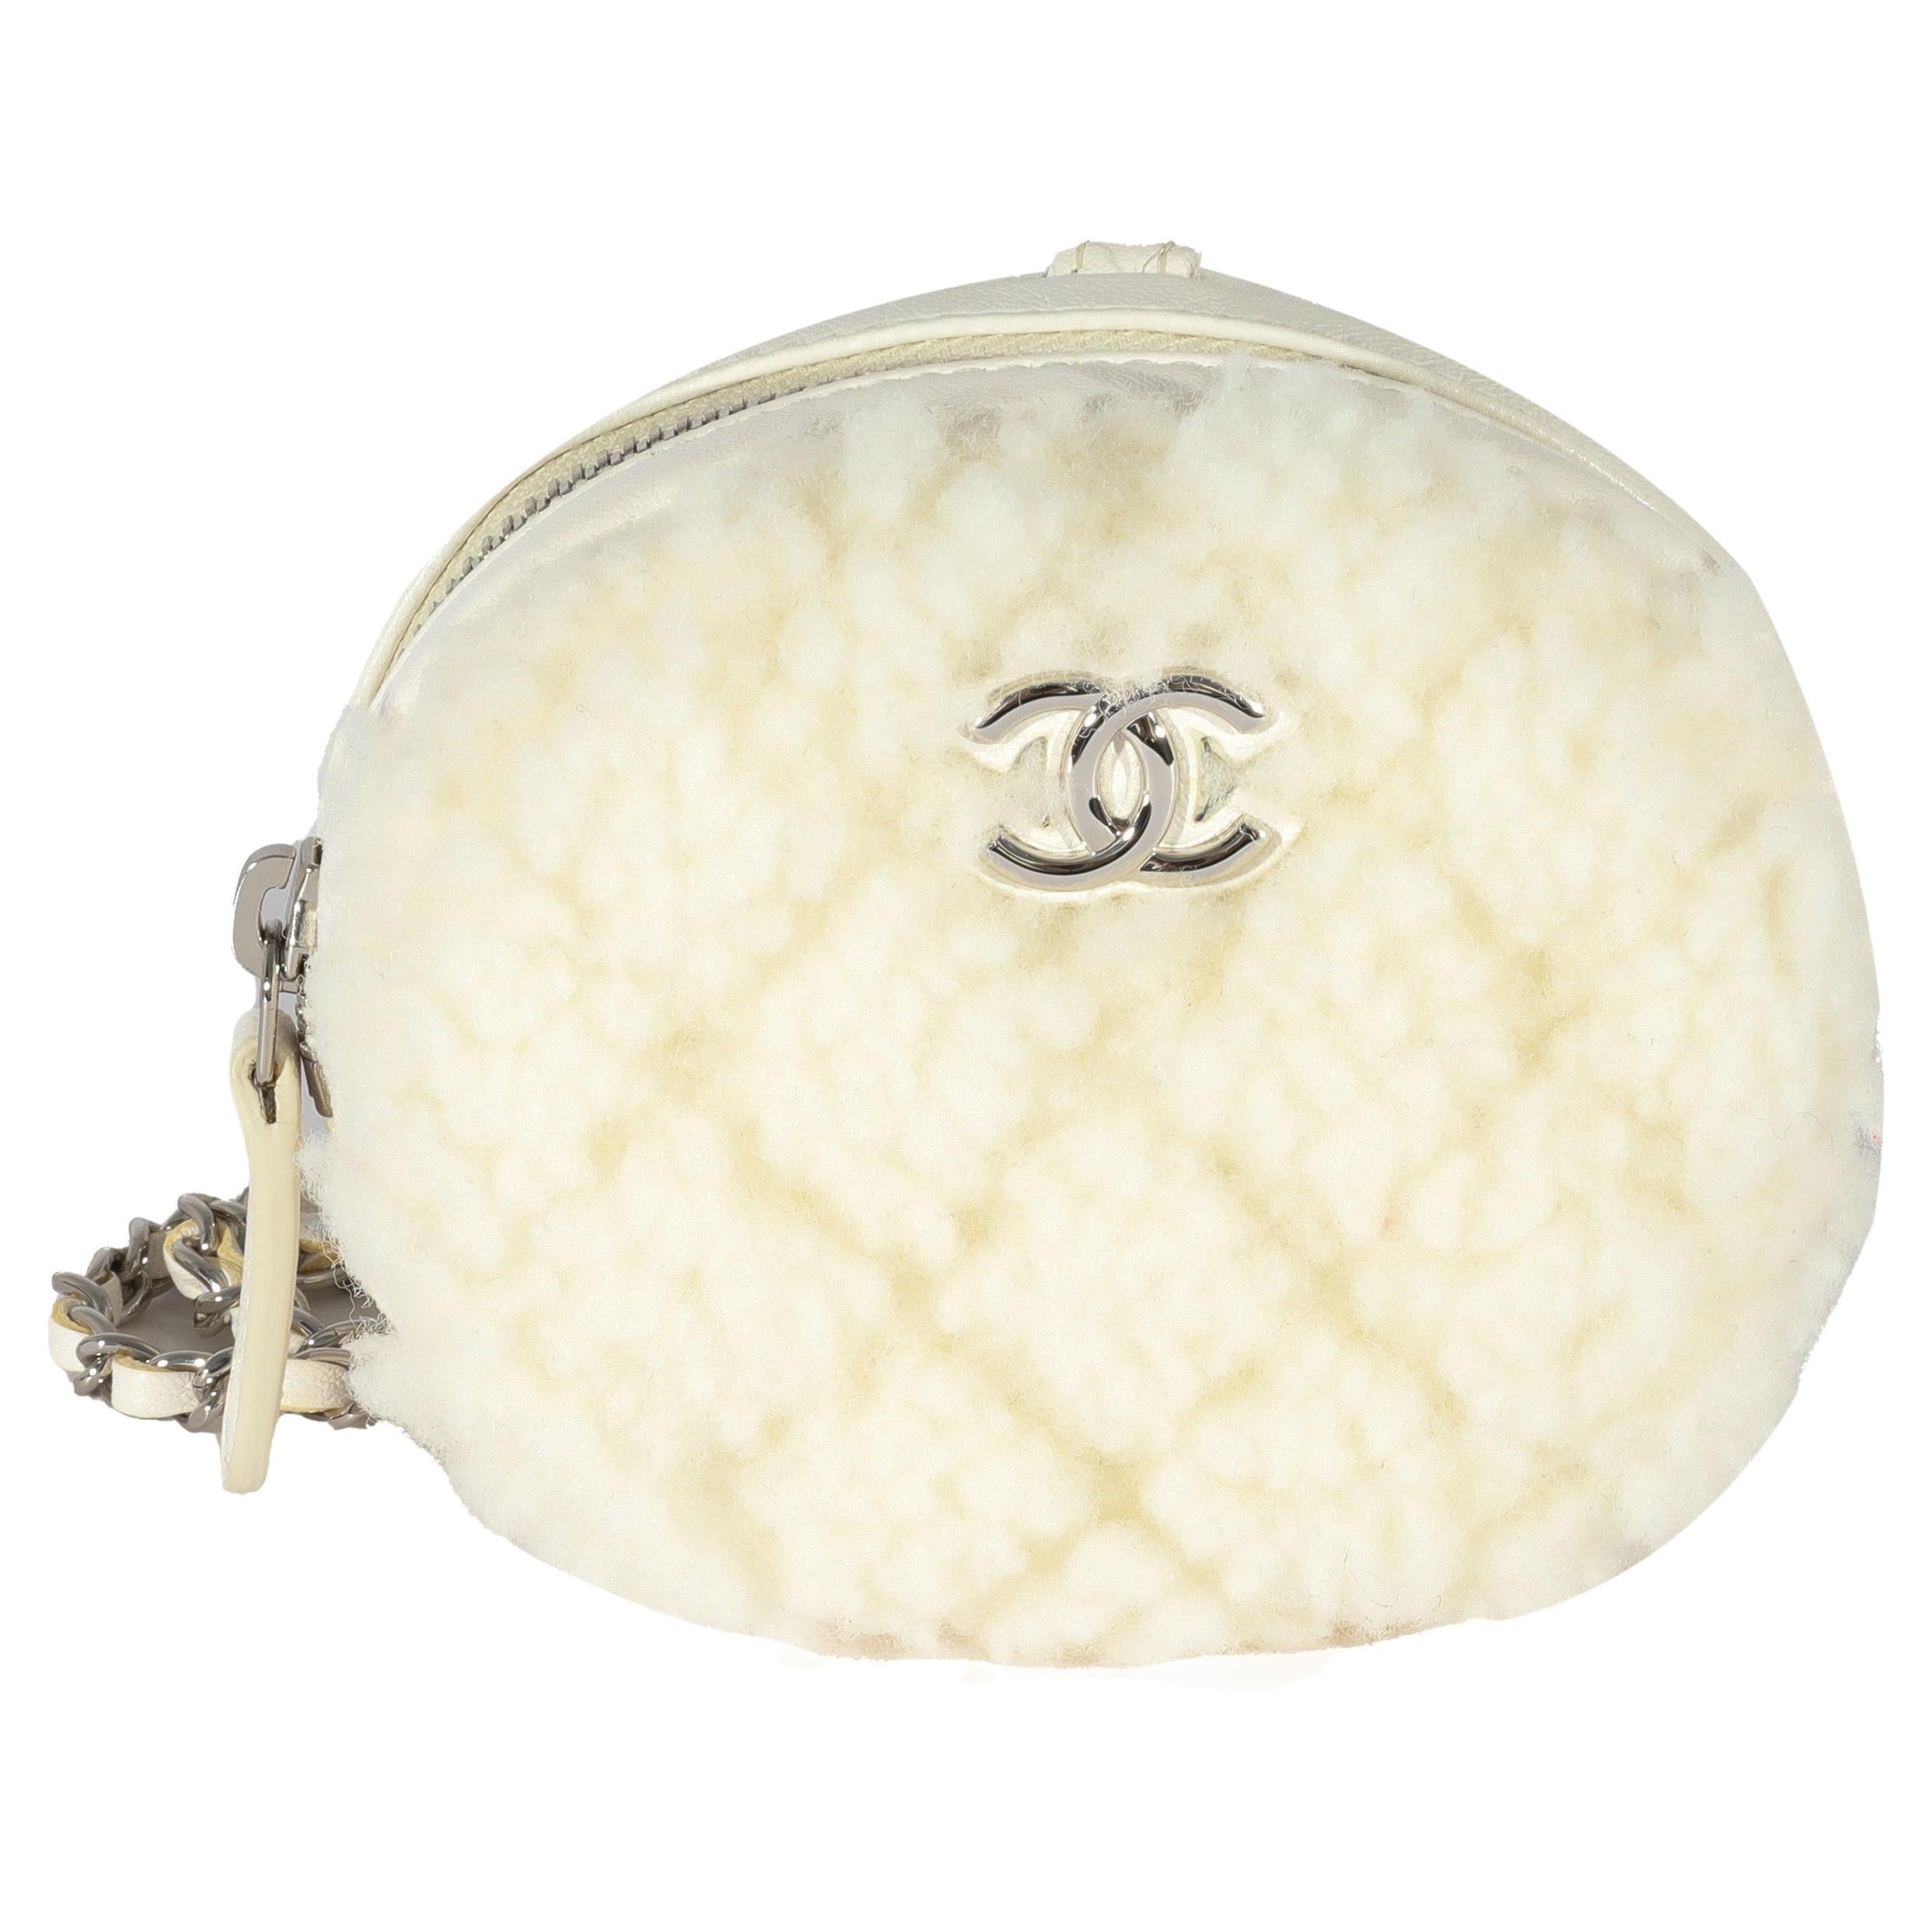 Chanel Clutch On Chain - 109 For Sale on 1stDibs